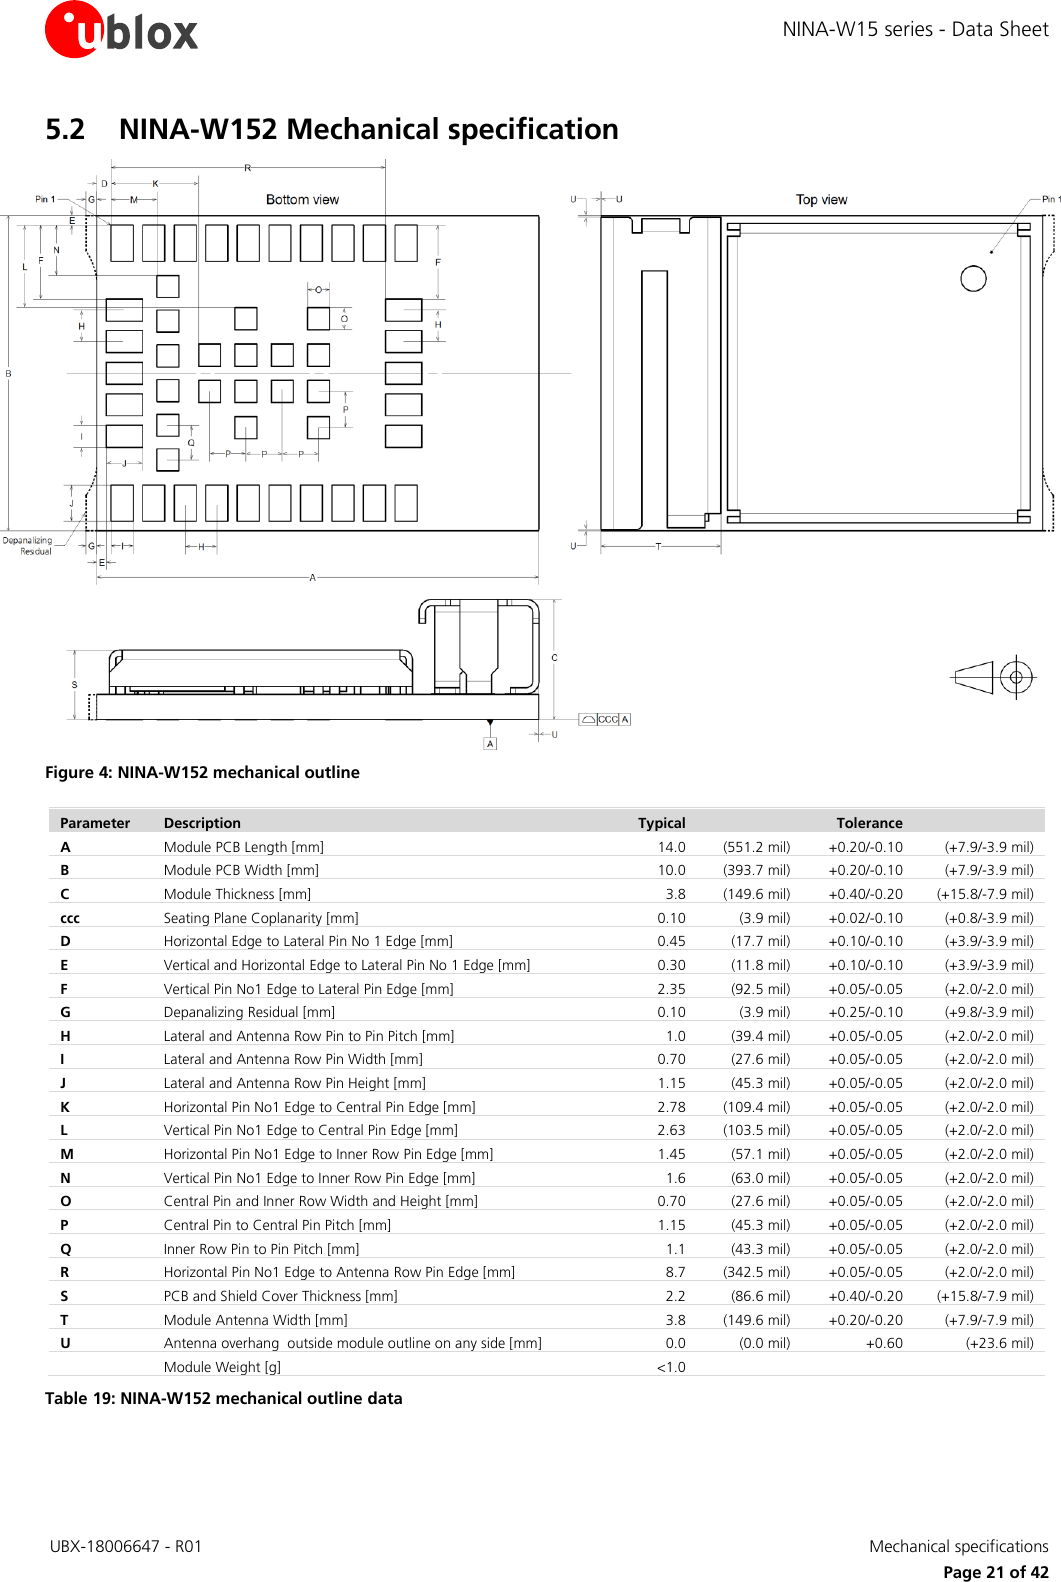 NINA-W15 series - Data Sheet  UBX-18006647 - R01   Mechanical specifications     Page 21 of 42 5.2 NINA-W152 Mechanical specification  Figure 4: NINA-W152 mechanical outline Parameter Description Typical  Tolerance  A  Module PCB Length [mm] 14.0 (551.2 mil) +0.20/-0.10 (+7.9/-3.9 mil) B Module PCB Width [mm] 10.0 (393.7 mil) +0.20/-0.10 (+7.9/-3.9 mil) C Module Thickness [mm] 3.8 (149.6 mil) +0.40/-0.20 (+15.8/-7.9 mil) ccc Seating Plane Coplanarity [mm] 0.10 (3.9 mil) +0.02/-0.10 (+0.8/-3.9 mil) D Horizontal Edge to Lateral Pin No 1 Edge [mm] 0.45 (17.7 mil) +0.10/-0.10 (+3.9/-3.9 mil) E Vertical and Horizontal Edge to Lateral Pin No 1 Edge [mm] 0.30 (11.8 mil) +0.10/-0.10 (+3.9/-3.9 mil) F Vertical Pin No1 Edge to Lateral Pin Edge [mm] 2.35 (92.5 mil) +0.05/-0.05 (+2.0/-2.0 mil) G Depanalizing Residual [mm] 0.10 (3.9 mil) +0.25/-0.10 (+9.8/-3.9 mil) H Lateral and Antenna Row Pin to Pin Pitch [mm] 1.0 (39.4 mil) +0.05/-0.05 (+2.0/-2.0 mil) I Lateral and Antenna Row Pin Width [mm] 0.70 (27.6 mil) +0.05/-0.05 (+2.0/-2.0 mil) J Lateral and Antenna Row Pin Height [mm] 1.15 (45.3 mil) +0.05/-0.05 (+2.0/-2.0 mil) K Horizontal Pin No1 Edge to Central Pin Edge [mm] 2.78 (109.4 mil) +0.05/-0.05 (+2.0/-2.0 mil) L Vertical Pin No1 Edge to Central Pin Edge [mm] 2.63 (103.5 mil) +0.05/-0.05 (+2.0/-2.0 mil) M Horizontal Pin No1 Edge to Inner Row Pin Edge [mm] 1.45 (57.1 mil) +0.05/-0.05 (+2.0/-2.0 mil) N Vertical Pin No1 Edge to Inner Row Pin Edge [mm] 1.6 (63.0 mil) +0.05/-0.05 (+2.0/-2.0 mil) O Central Pin and Inner Row Width and Height [mm] 0.70 (27.6 mil) +0.05/-0.05 (+2.0/-2.0 mil) P Central Pin to Central Pin Pitch [mm] 1.15 (45.3 mil) +0.05/-0.05 (+2.0/-2.0 mil) Q Inner Row Pin to Pin Pitch [mm] 1.1 (43.3 mil) +0.05/-0.05 (+2.0/-2.0 mil) R Horizontal Pin No1 Edge to Antenna Row Pin Edge [mm] 8.7 (342.5 mil) +0.05/-0.05 (+2.0/-2.0 mil) S PCB and Shield Cover Thickness [mm] 2.2 (86.6 mil) +0.40/-0.20 (+15.8/-7.9 mil) T Module Antenna Width [mm] 3.8 (149.6 mil) +0.20/-0.20 (+7.9/-7.9 mil) U Antenna overhang  outside module outline on any side [mm] 0.0 (0.0 mil) +0.60 (+23.6 mil)  Module Weight [g] &lt;1.0    Table 19: NINA-W152 mechanical outline data 